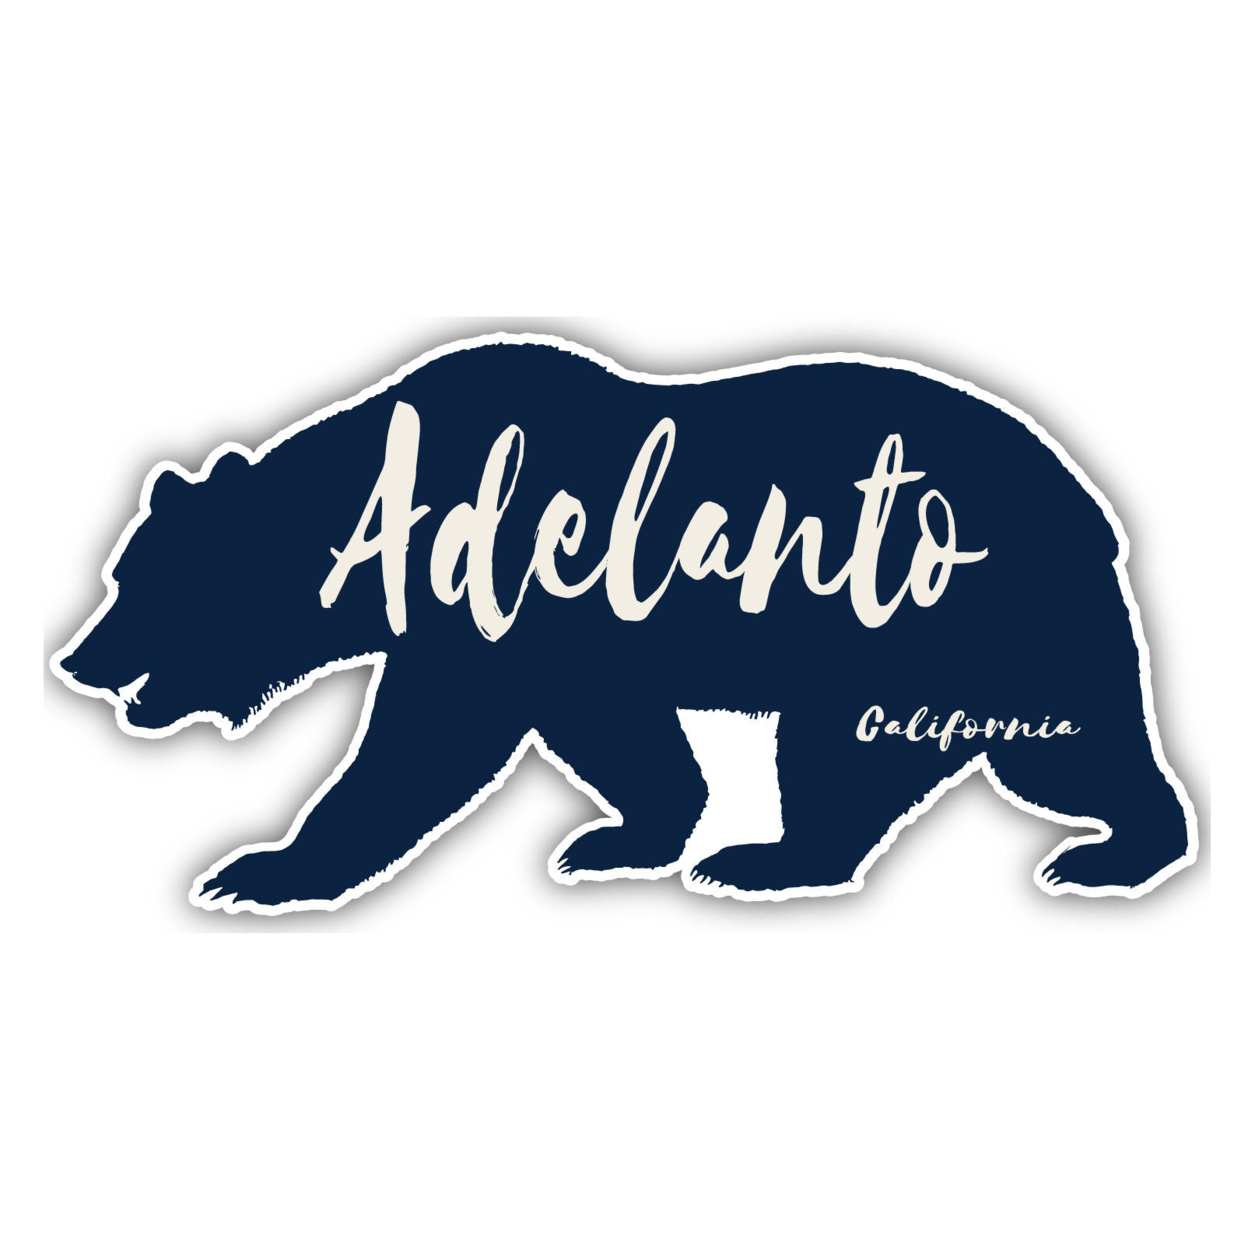 Adelanto California Souvenir Decorative Stickers (Choose Theme And Size) - 4-Pack, 6-Inch, Bear